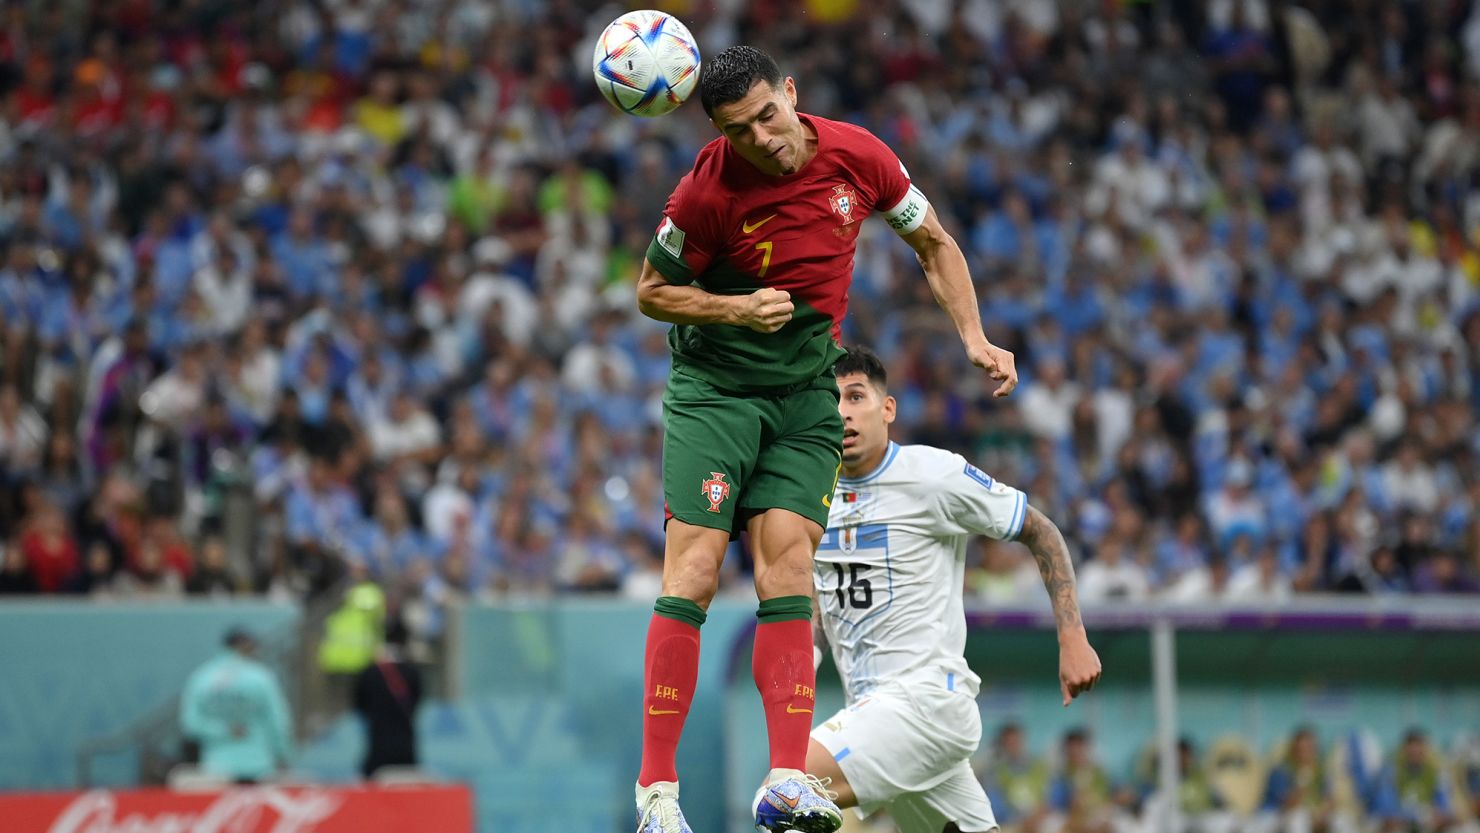  Cristiano Ronaldo is scoring a goal with his head during a match of the European Championship.